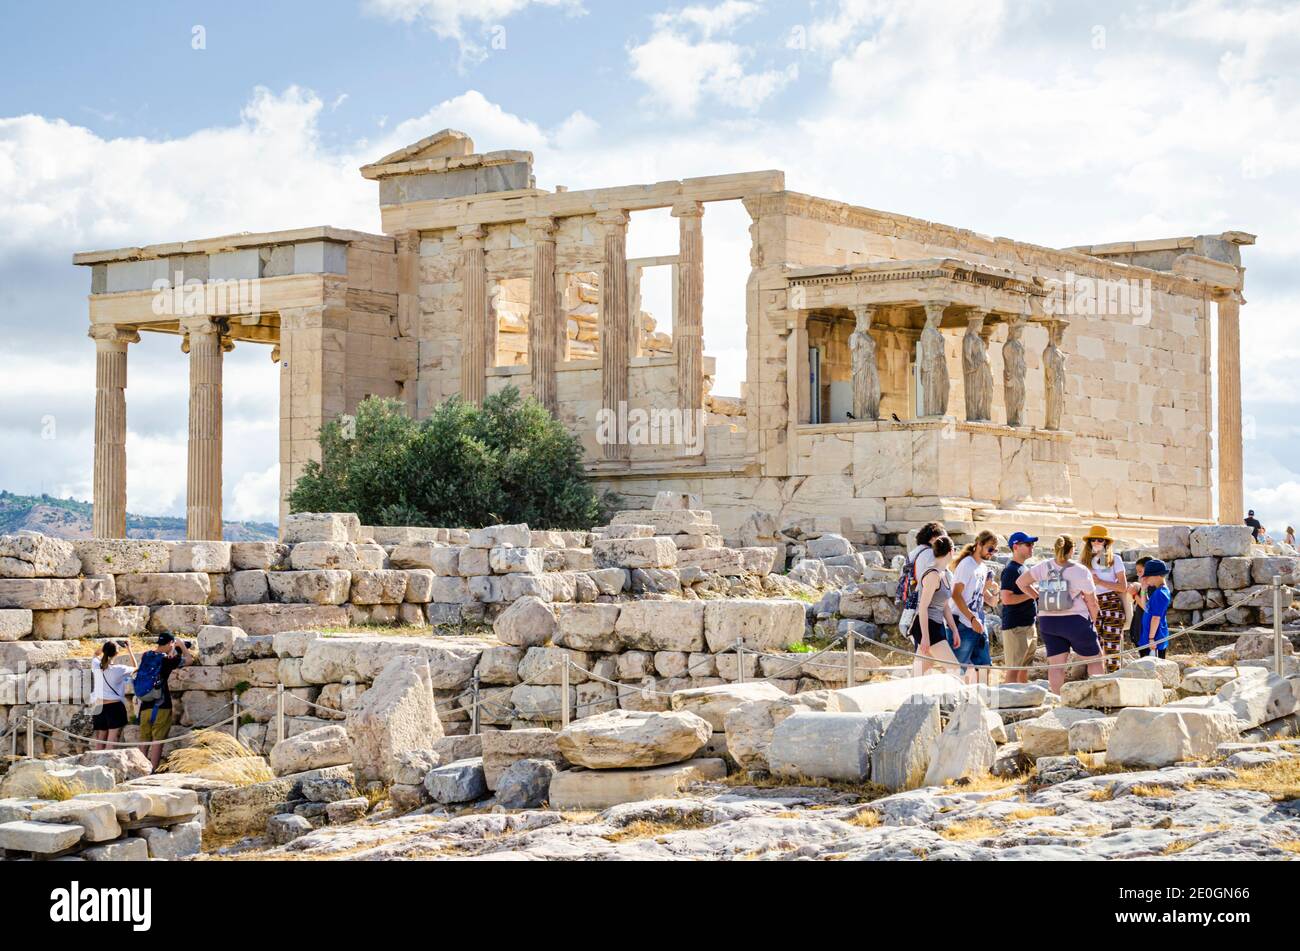 Tourists at the Porch of the Caryatids and Erechtheion behind the stone ruins of the old Temple of Athena, Acropolis, Athens, Greece Stock Photo